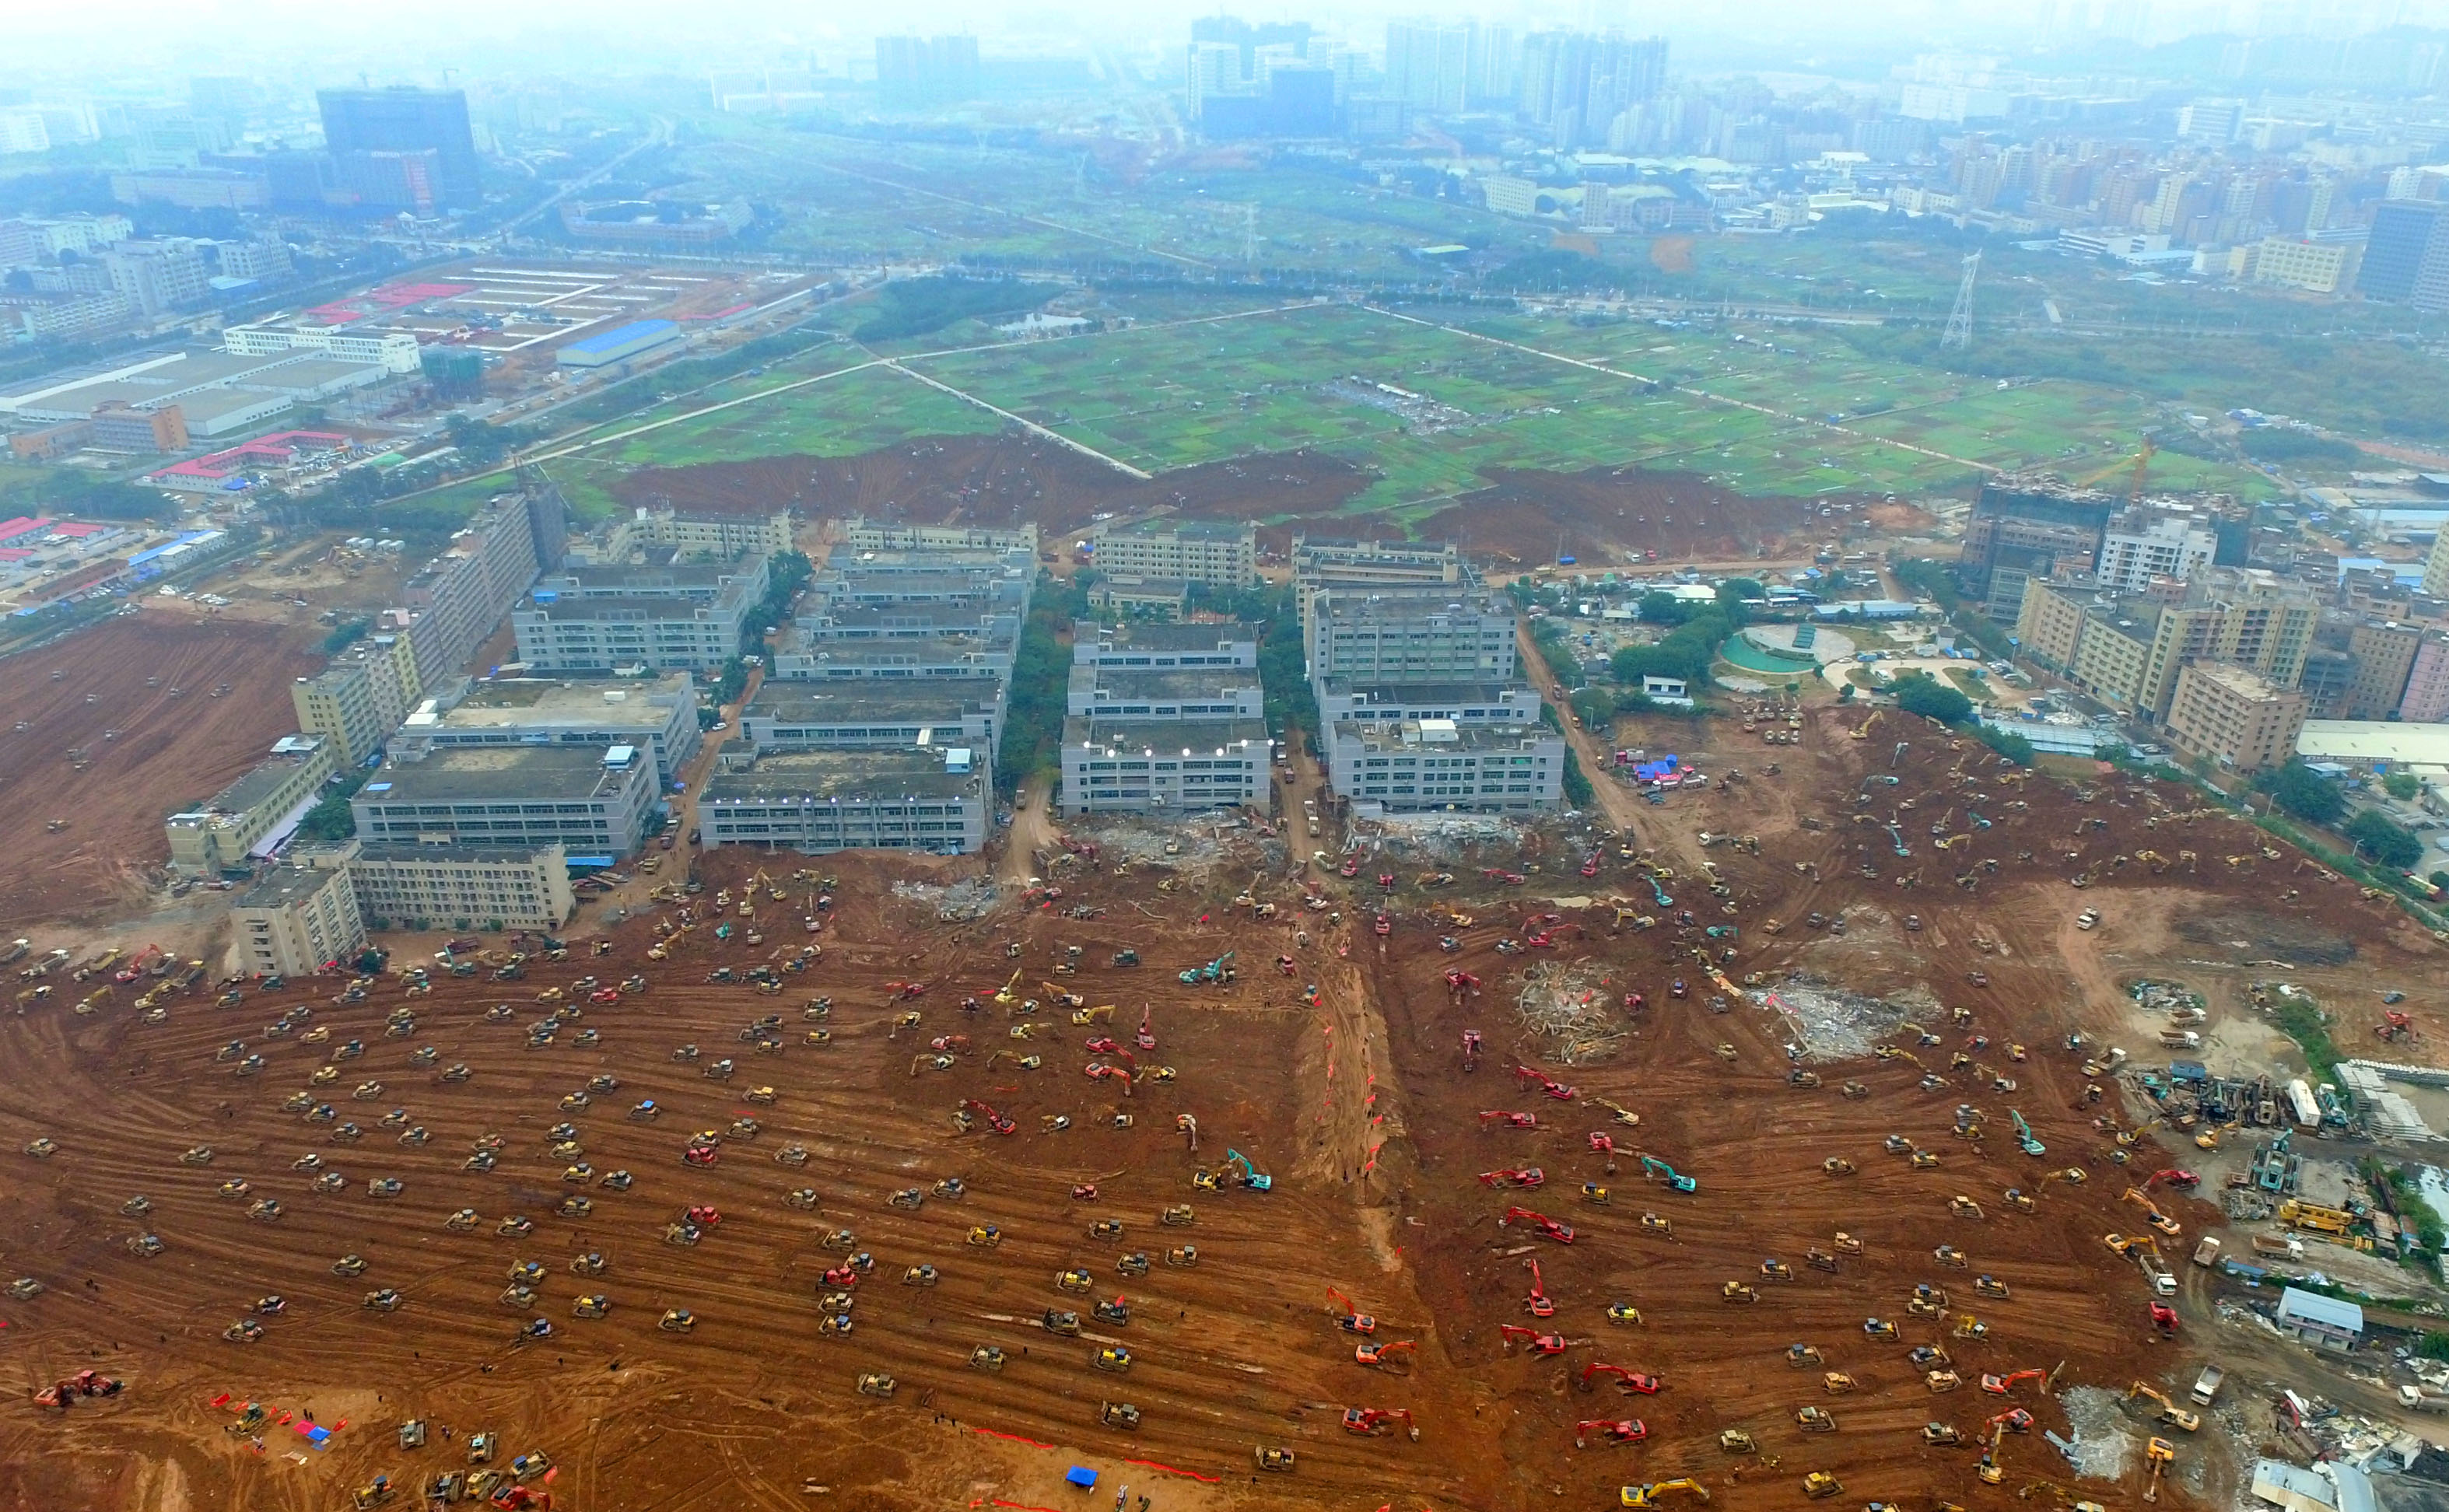 (151227) -- SHENZHEN, Dec. 27, 2015 (Xinhua) -- Photo taken on Dec. 27, 2015 shows the landslide site at an industrial park in Shenzhen, south China's Guangdong Province. The death toll is confirmed at seven, with 75 still unaccounted for. Rescue work continues although their chance of survival dims with time. (Xinhua/Lu Hanxin) (dhf)